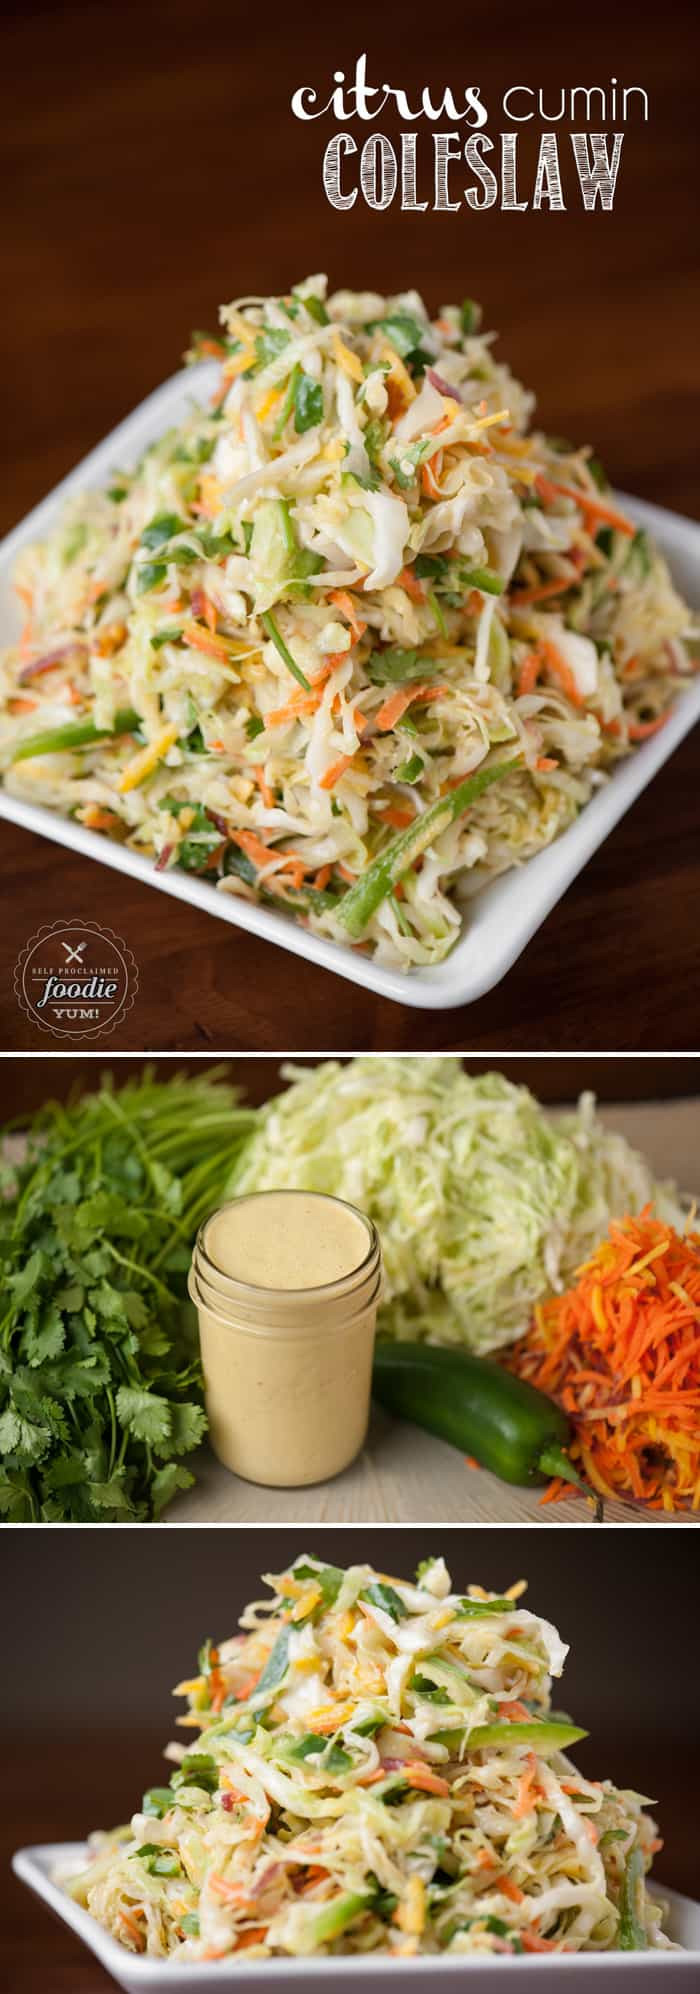 Healthy Side Dishes For Tacos
 Citrus Cumin Coleslaw